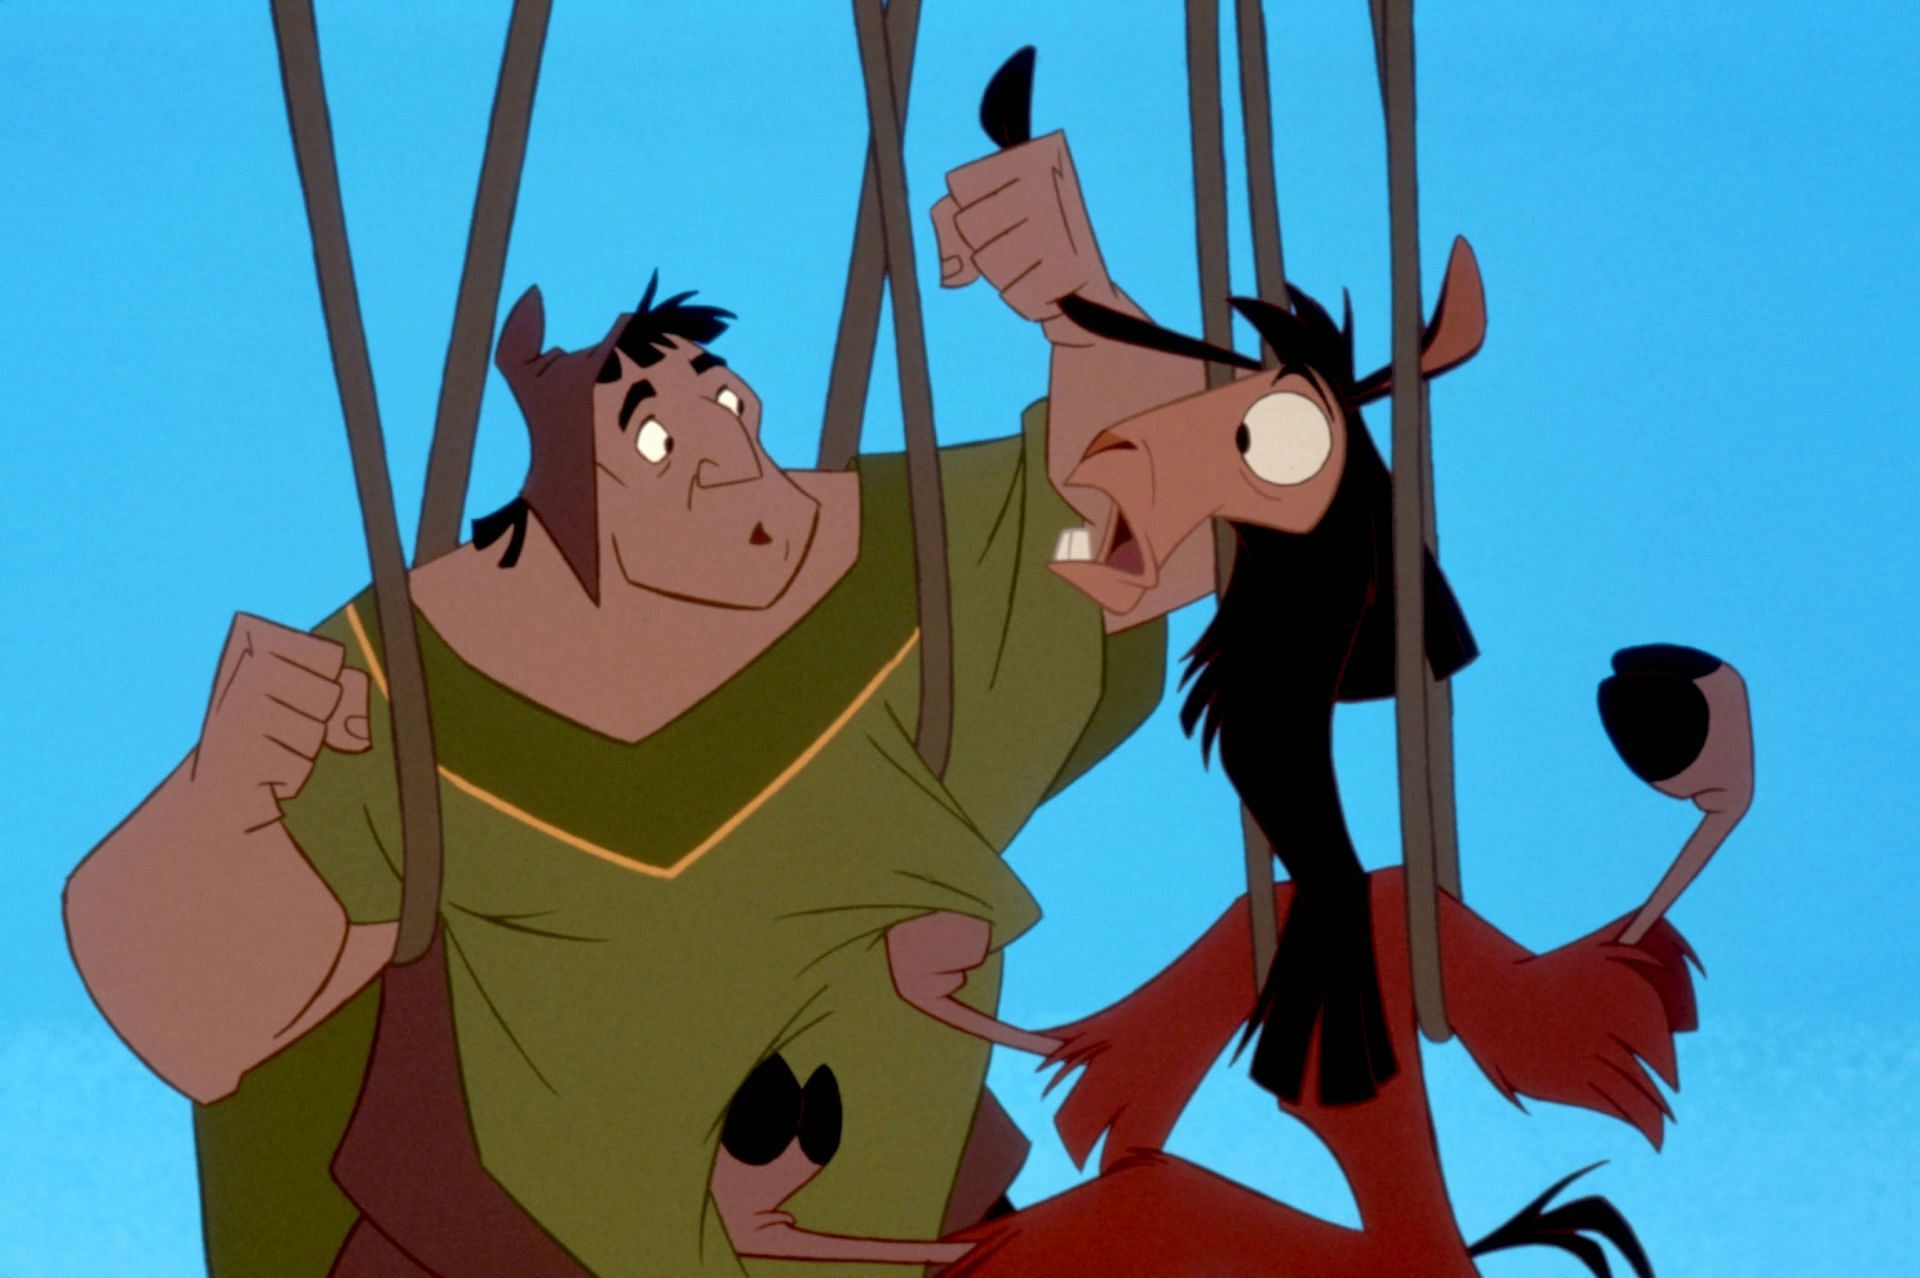 Pacha and Kuzco as they appear in the film (Image via Disney)